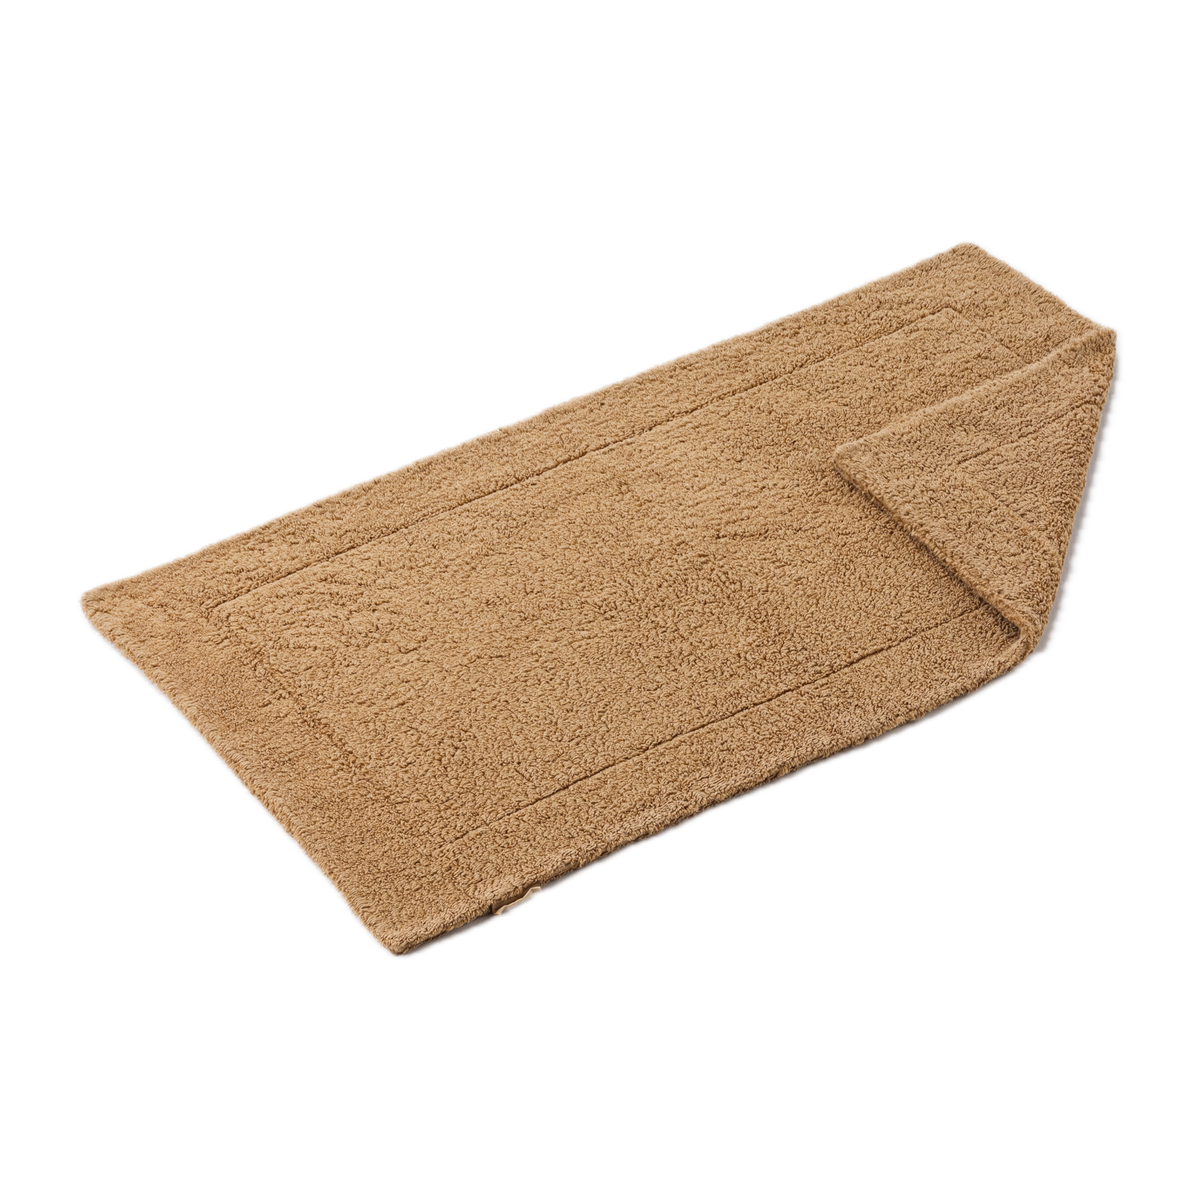 Slanted Image of Abyss Double Bath Tub Mat in Croissant (716) Color with Fold